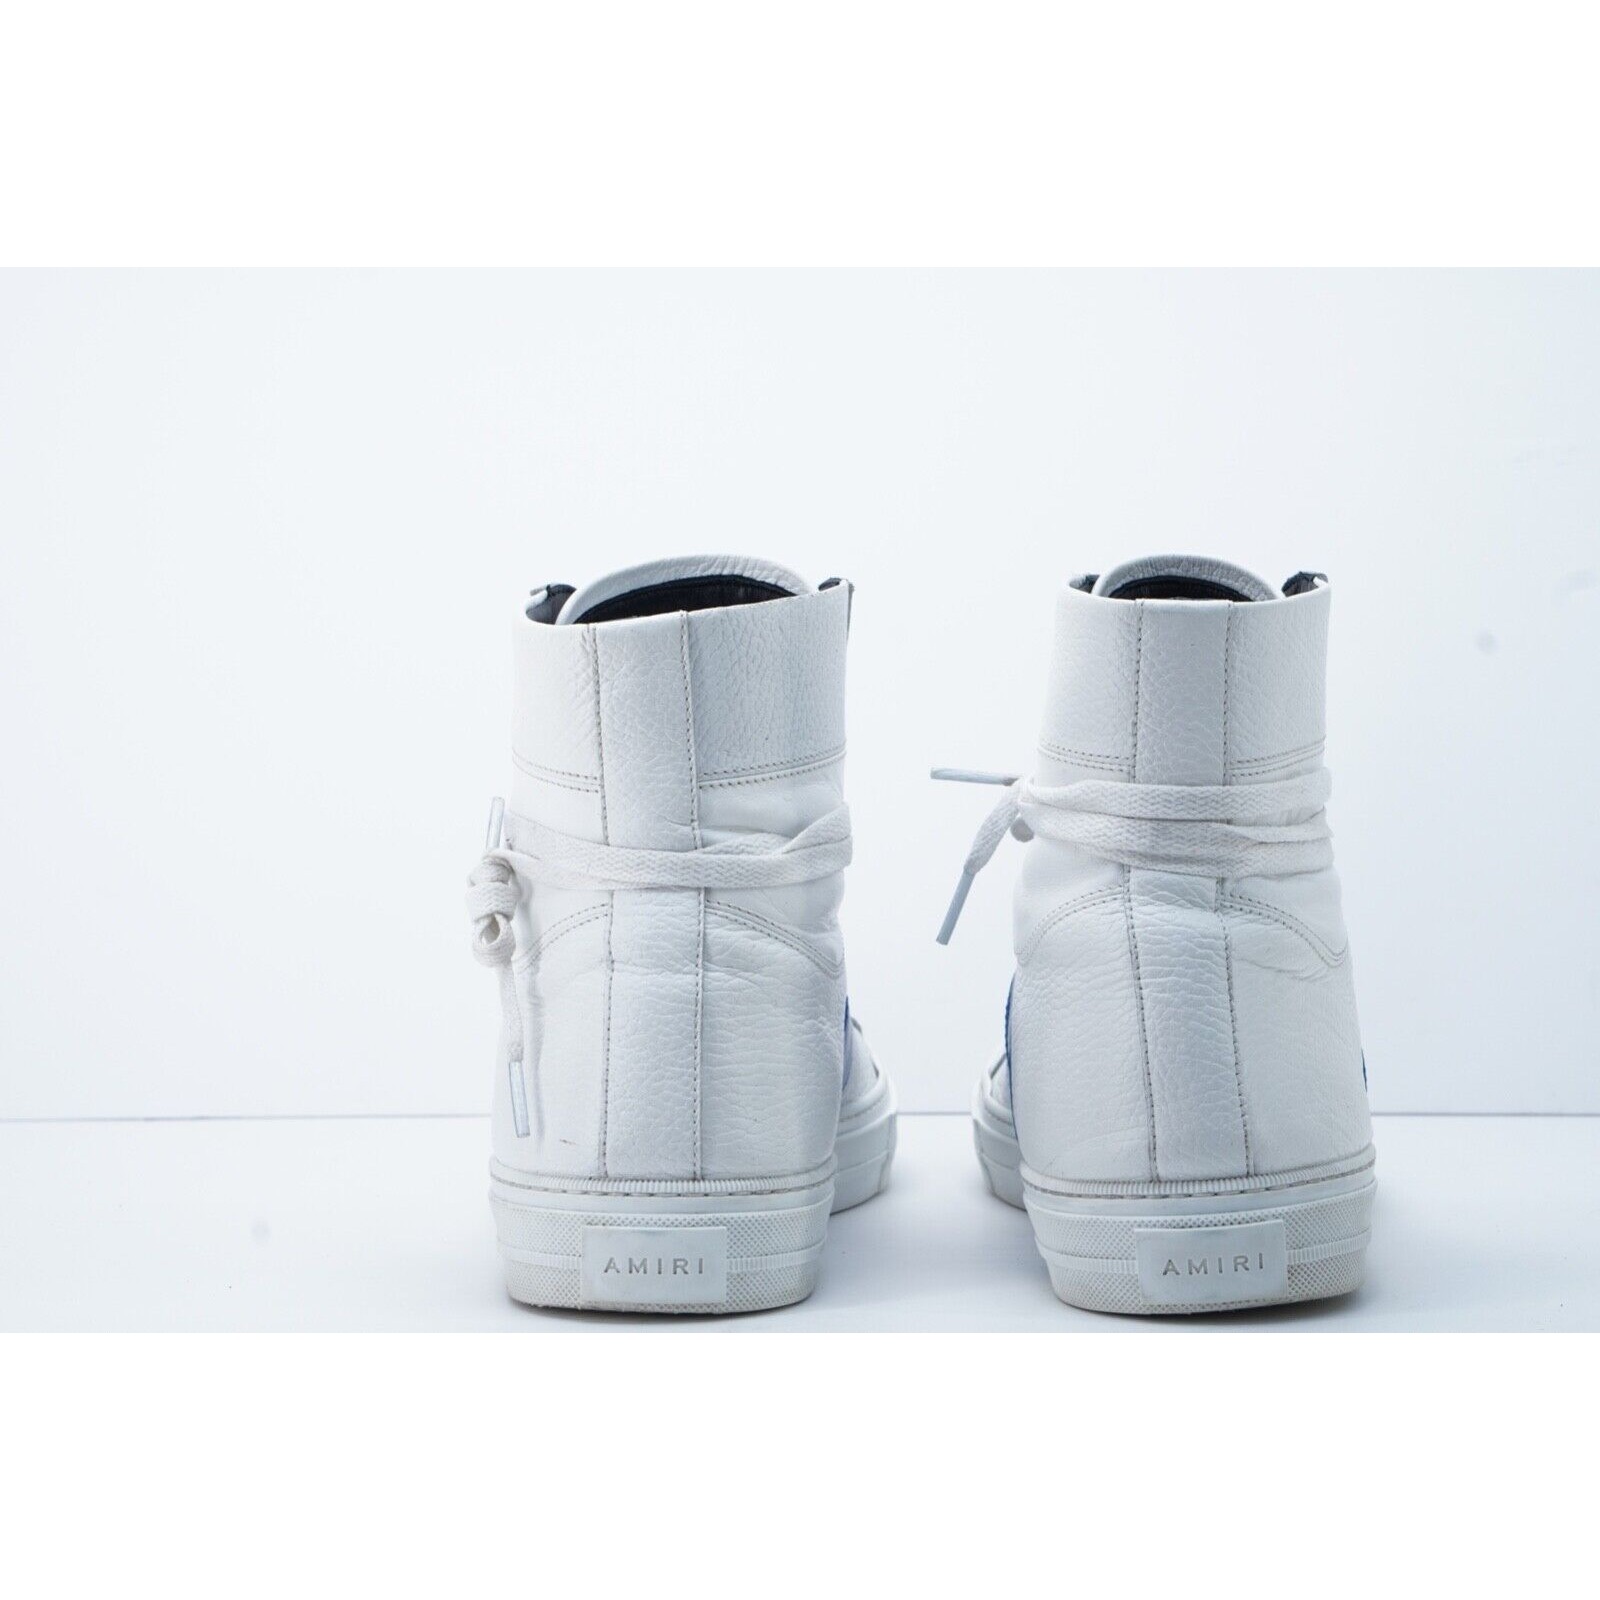 Amiri Sunset Sneakers White Blue High Top Lace Up $595 - Siz - 10